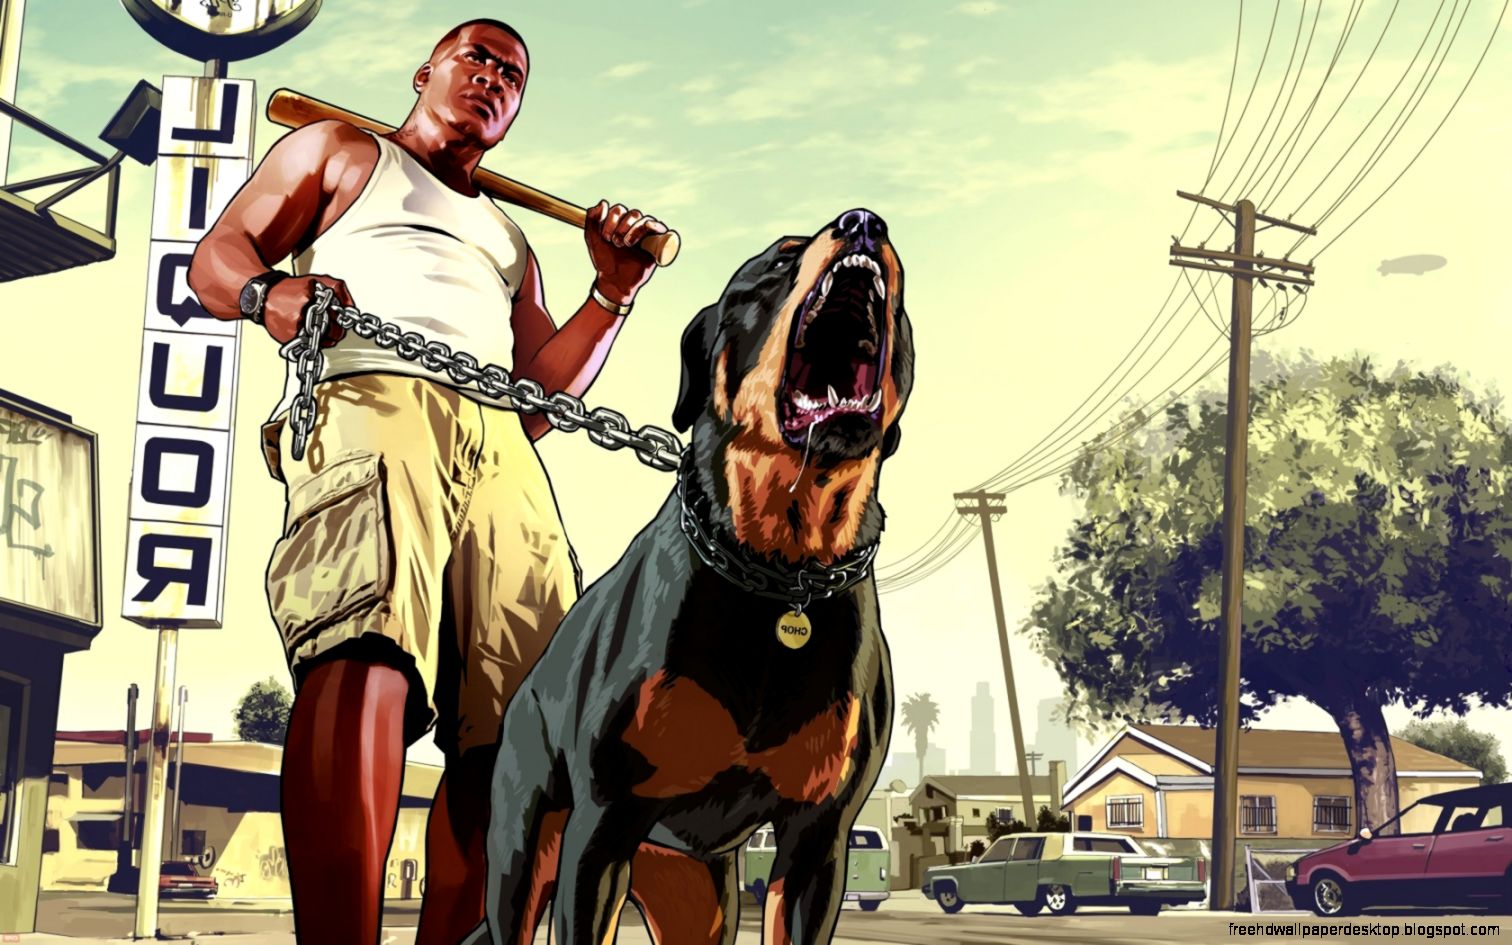 Grand Theft Auto 5 - PC - Games Torrents